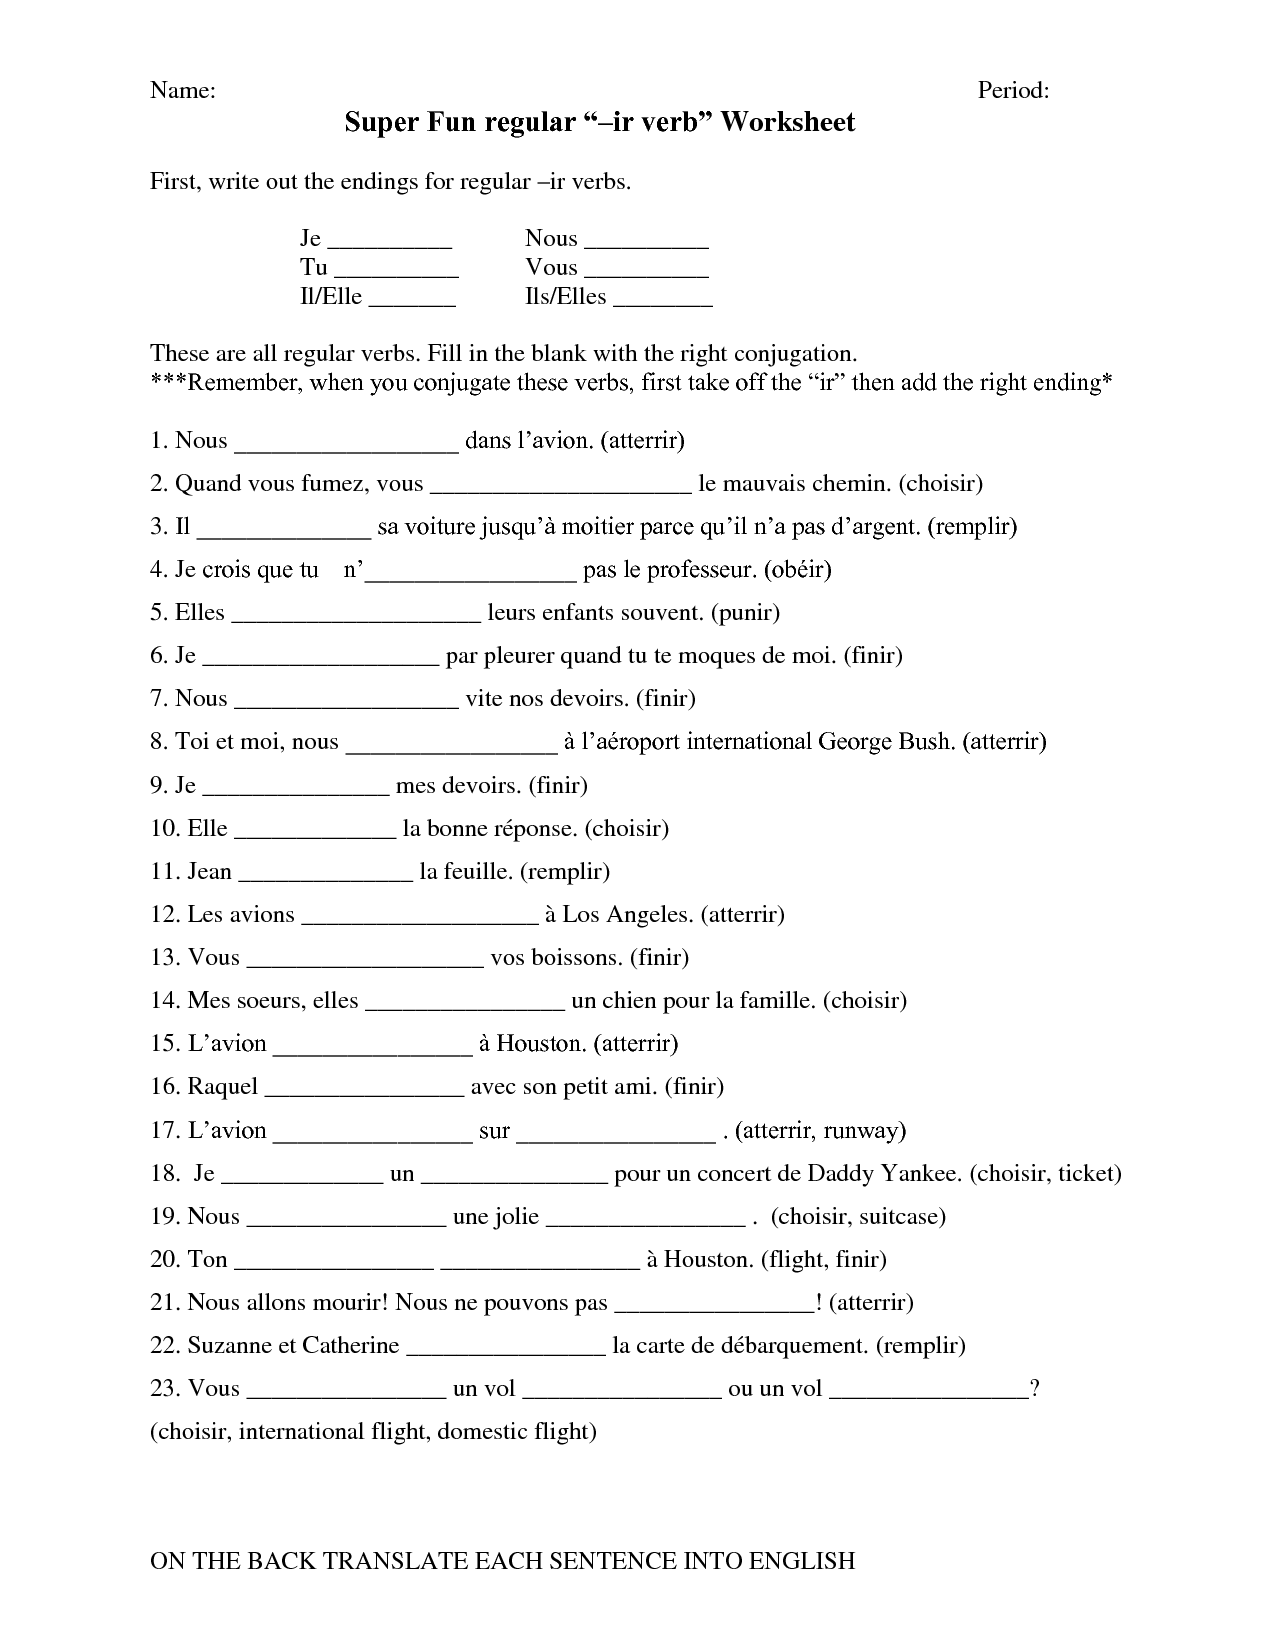 resources-english-verbs-worksheets-nouns-activities-first-grade-activities-first-grade